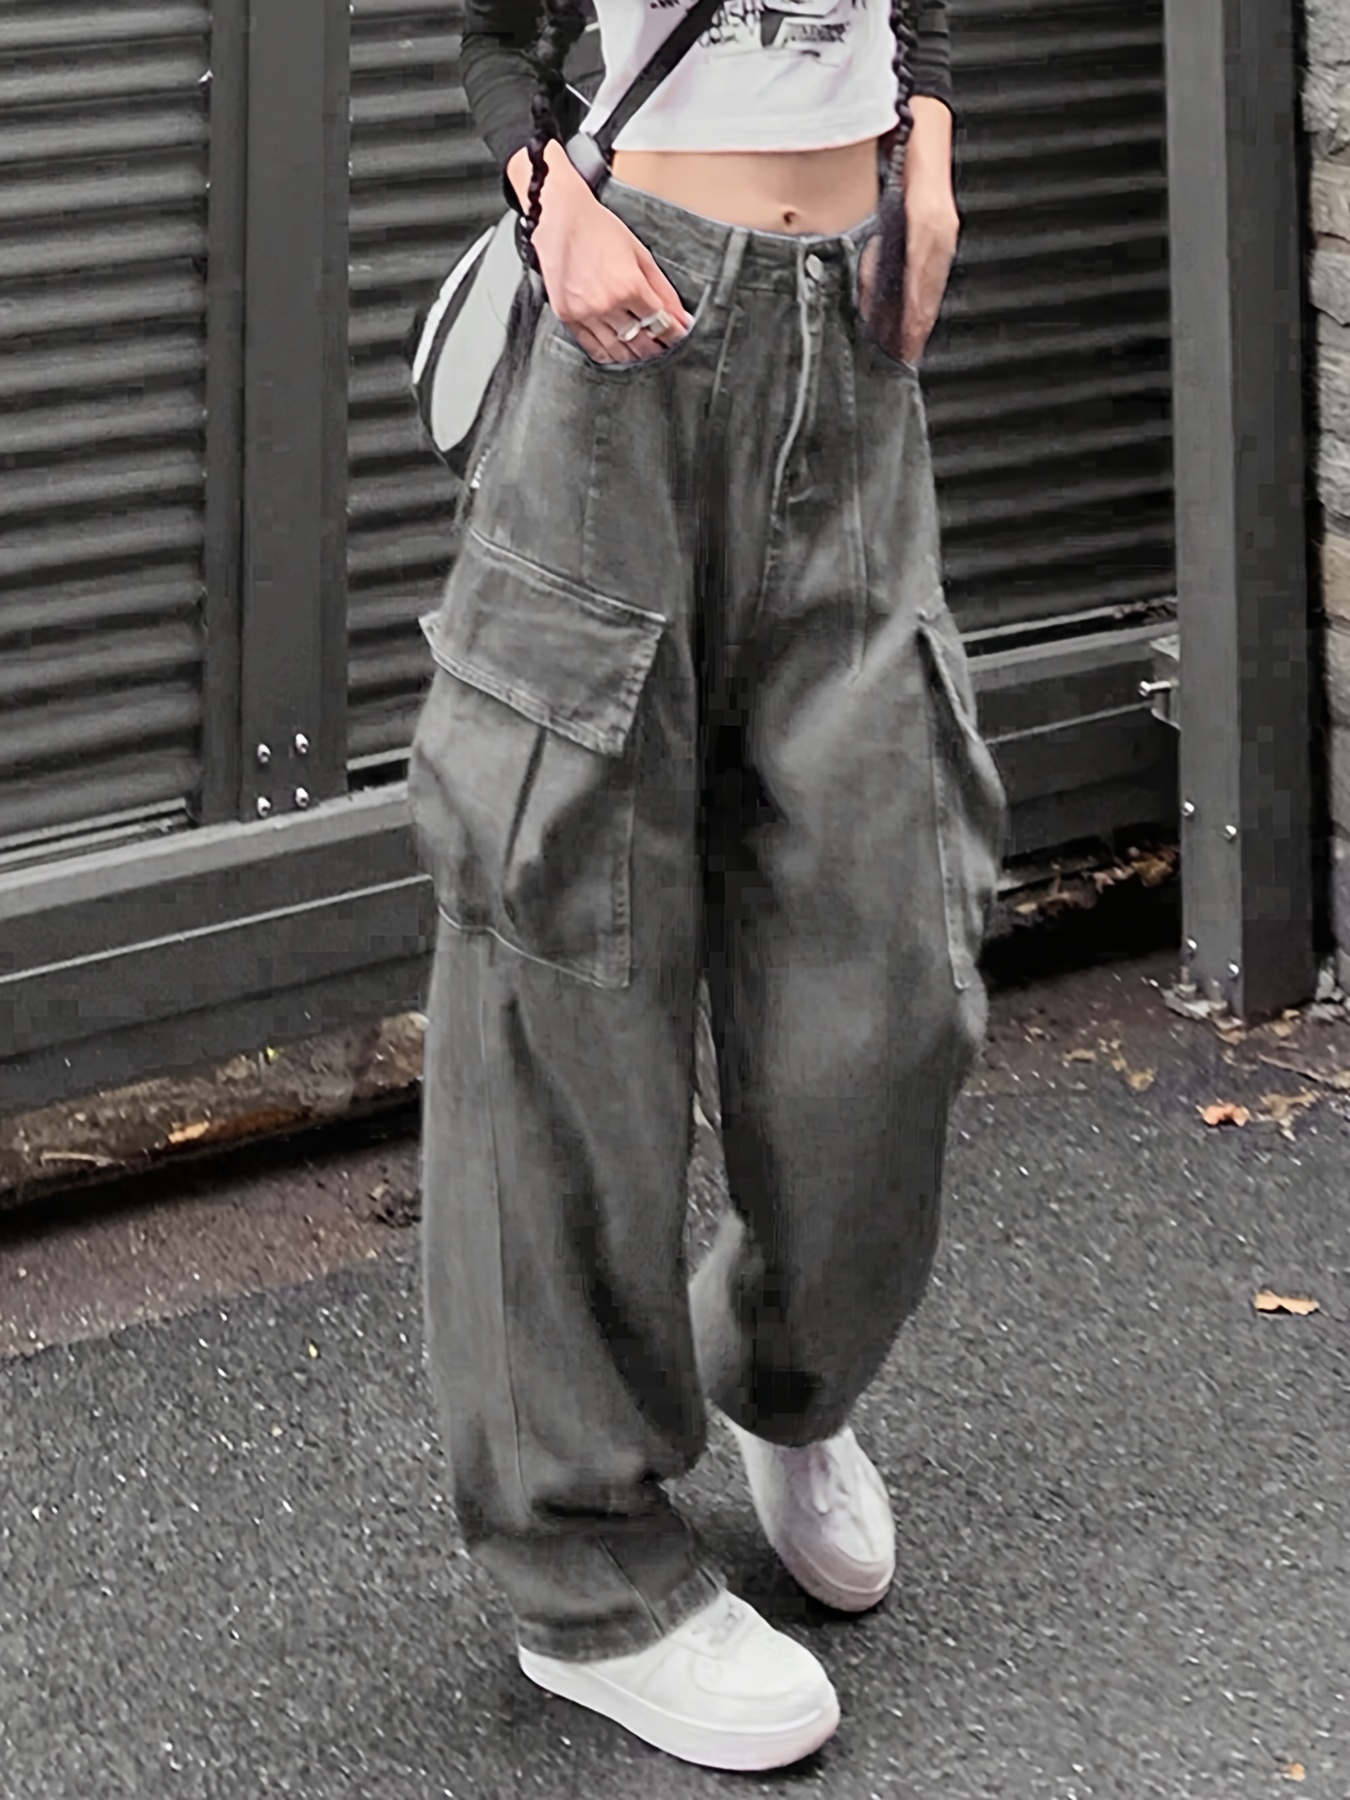 *-* Dark Gray Cargo Pants, Relaxed Fit Loose Straight Leg Cargo Style Jeans  With Pockets, Y2K Kpop Vintage Style, Women's Clothing & Denim